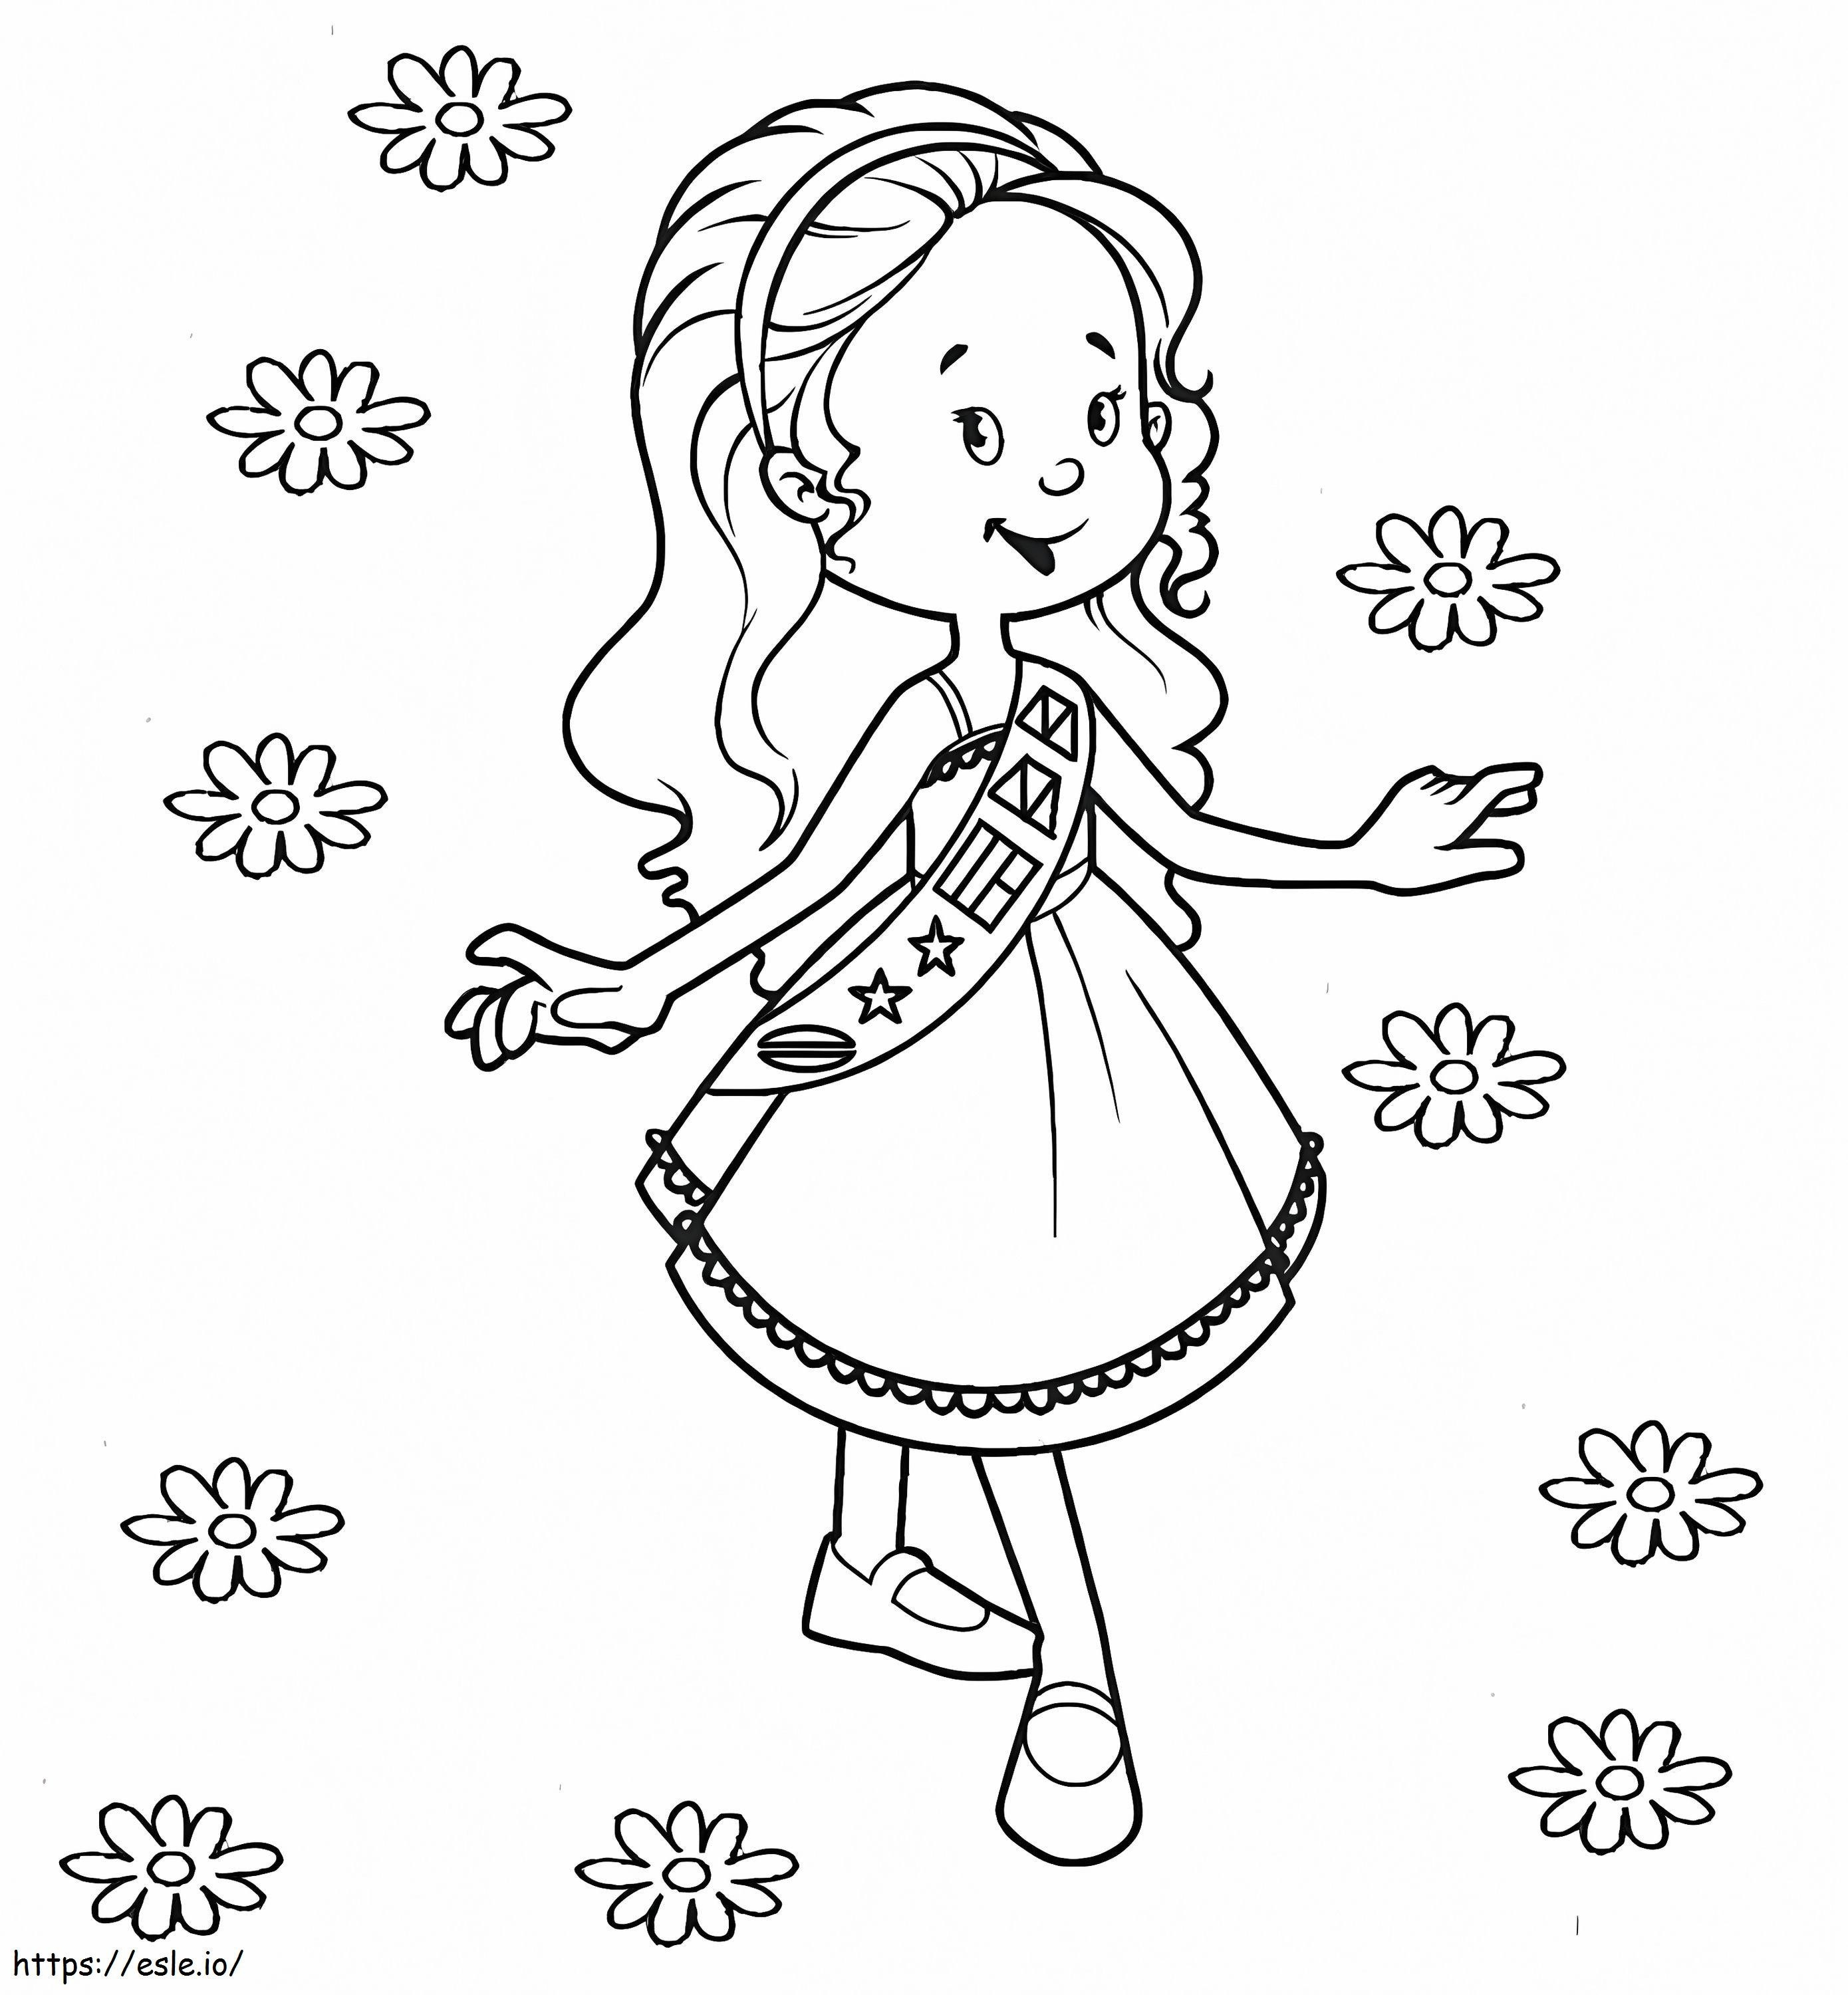 Girl Scout 4 coloring page